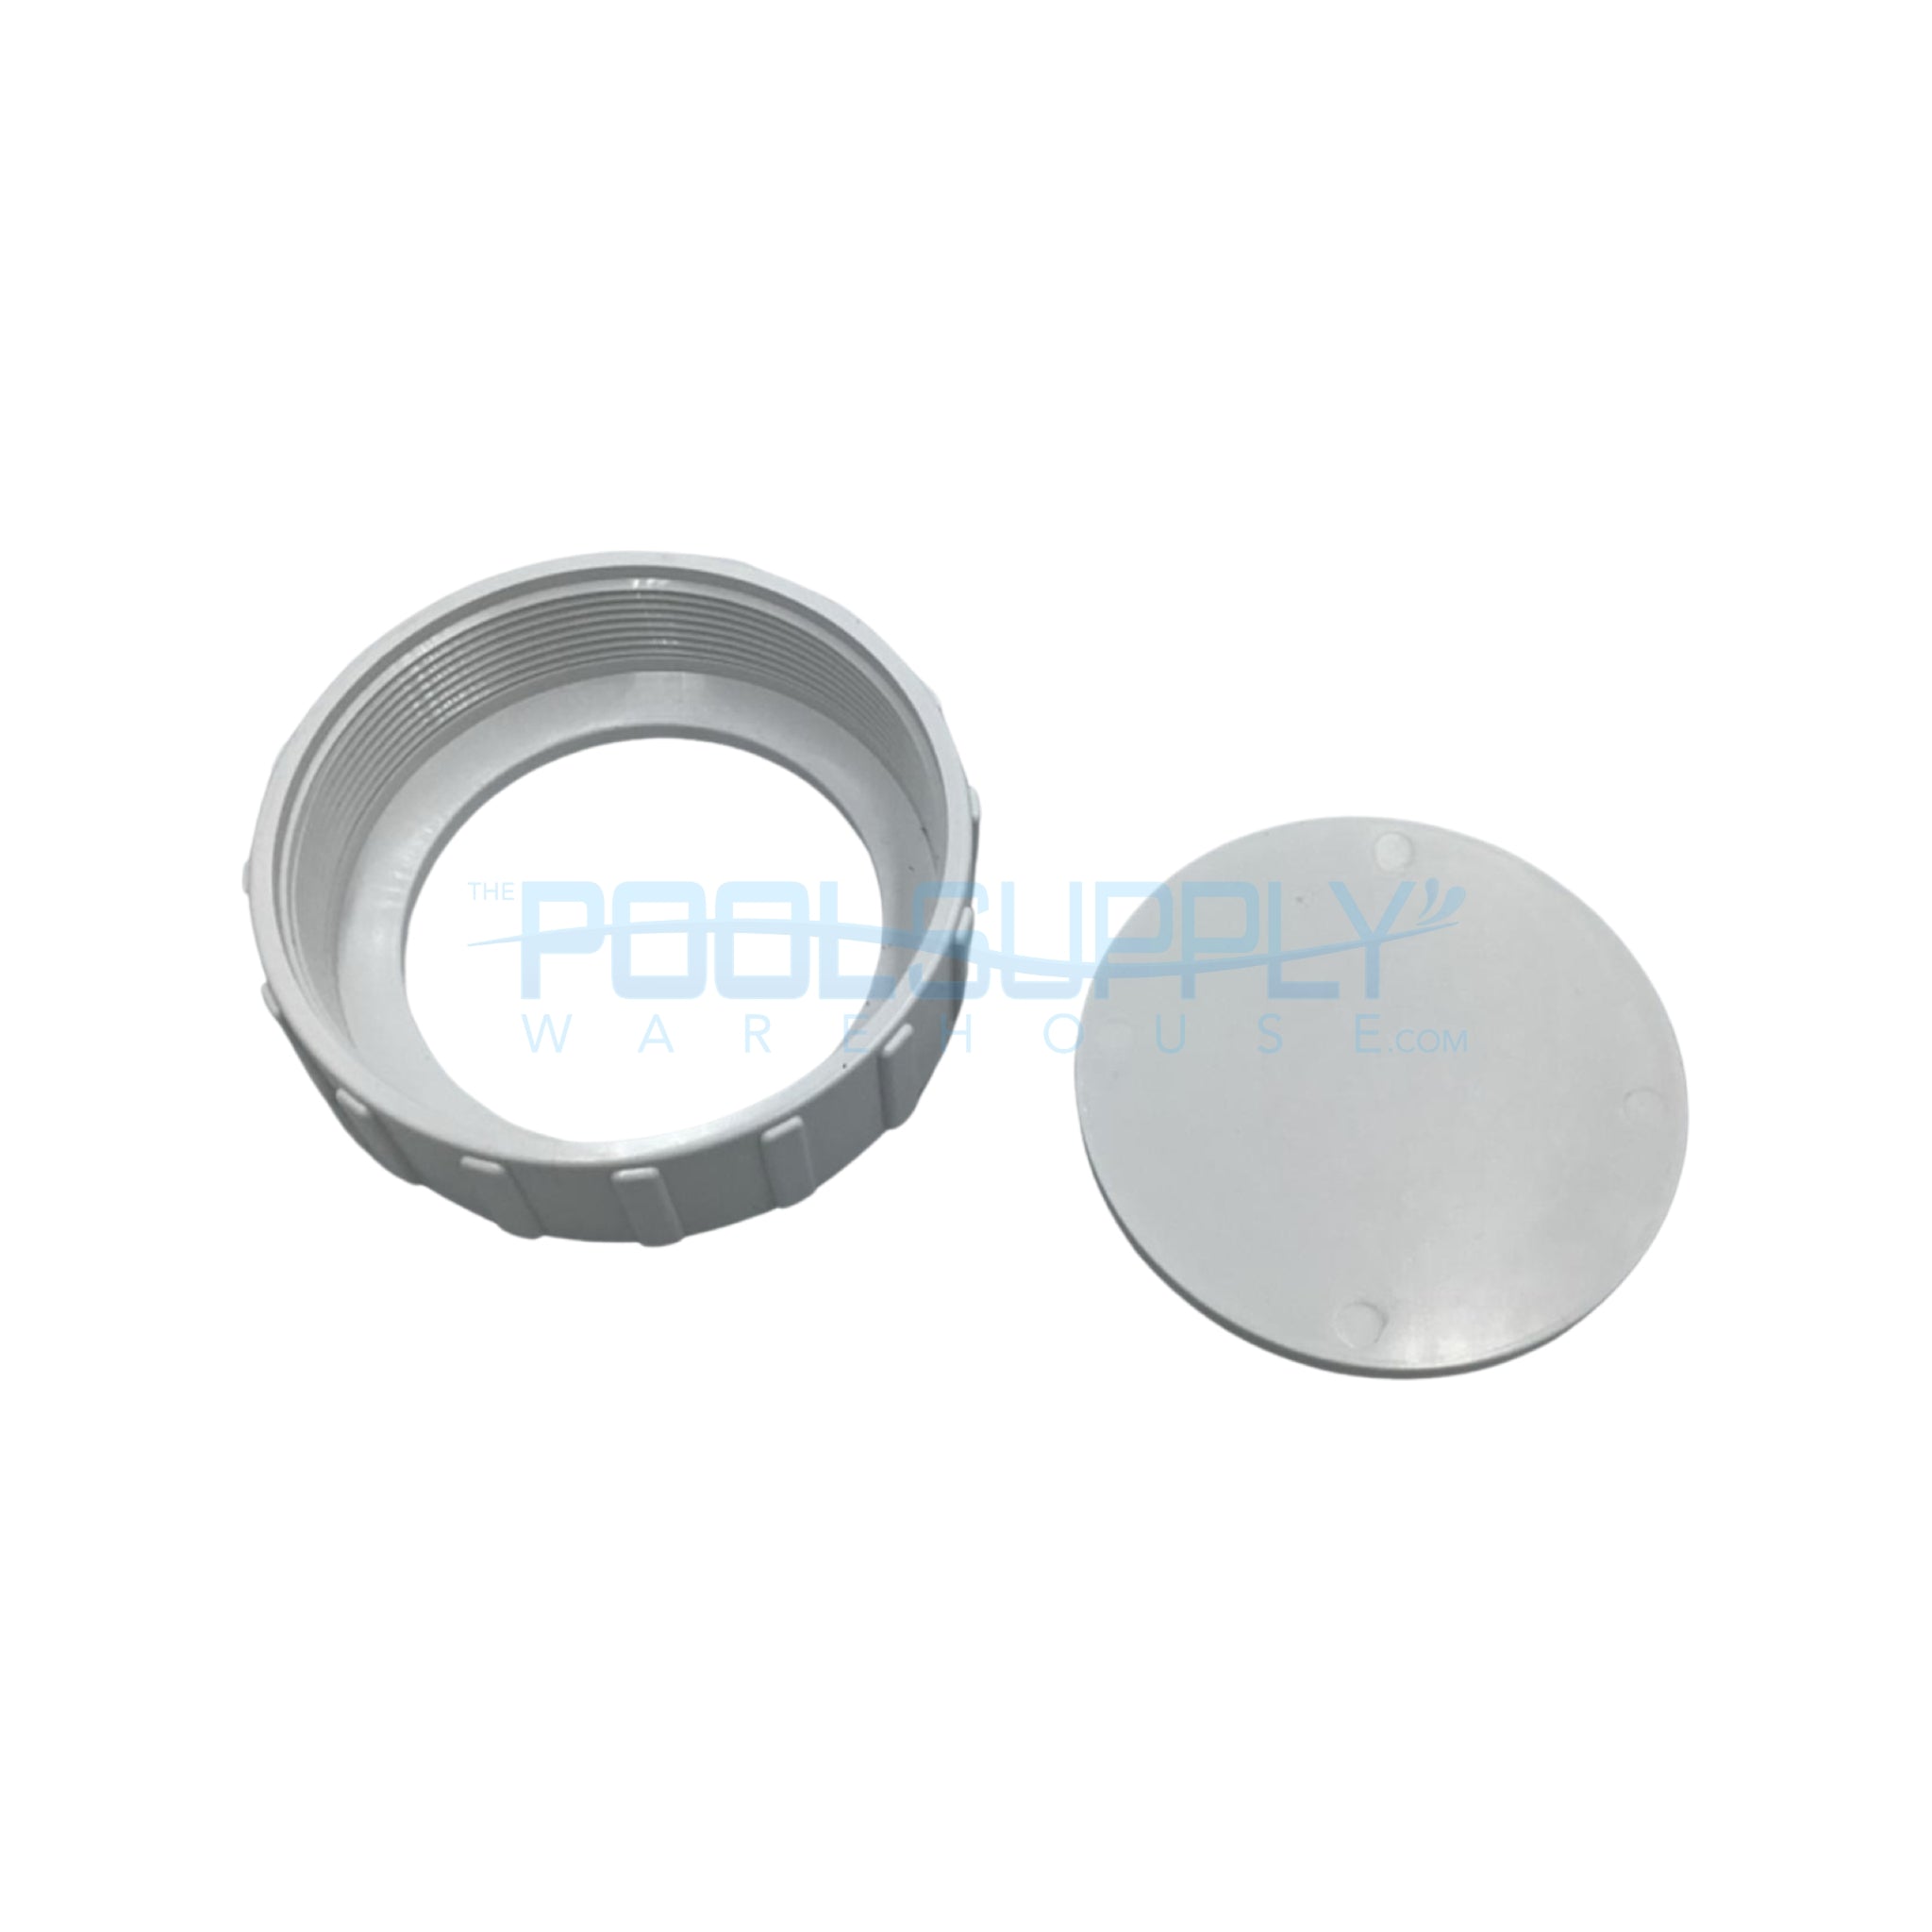 Solaxx / PureChlor Salt Cell Cleaning Cap - SBY00200